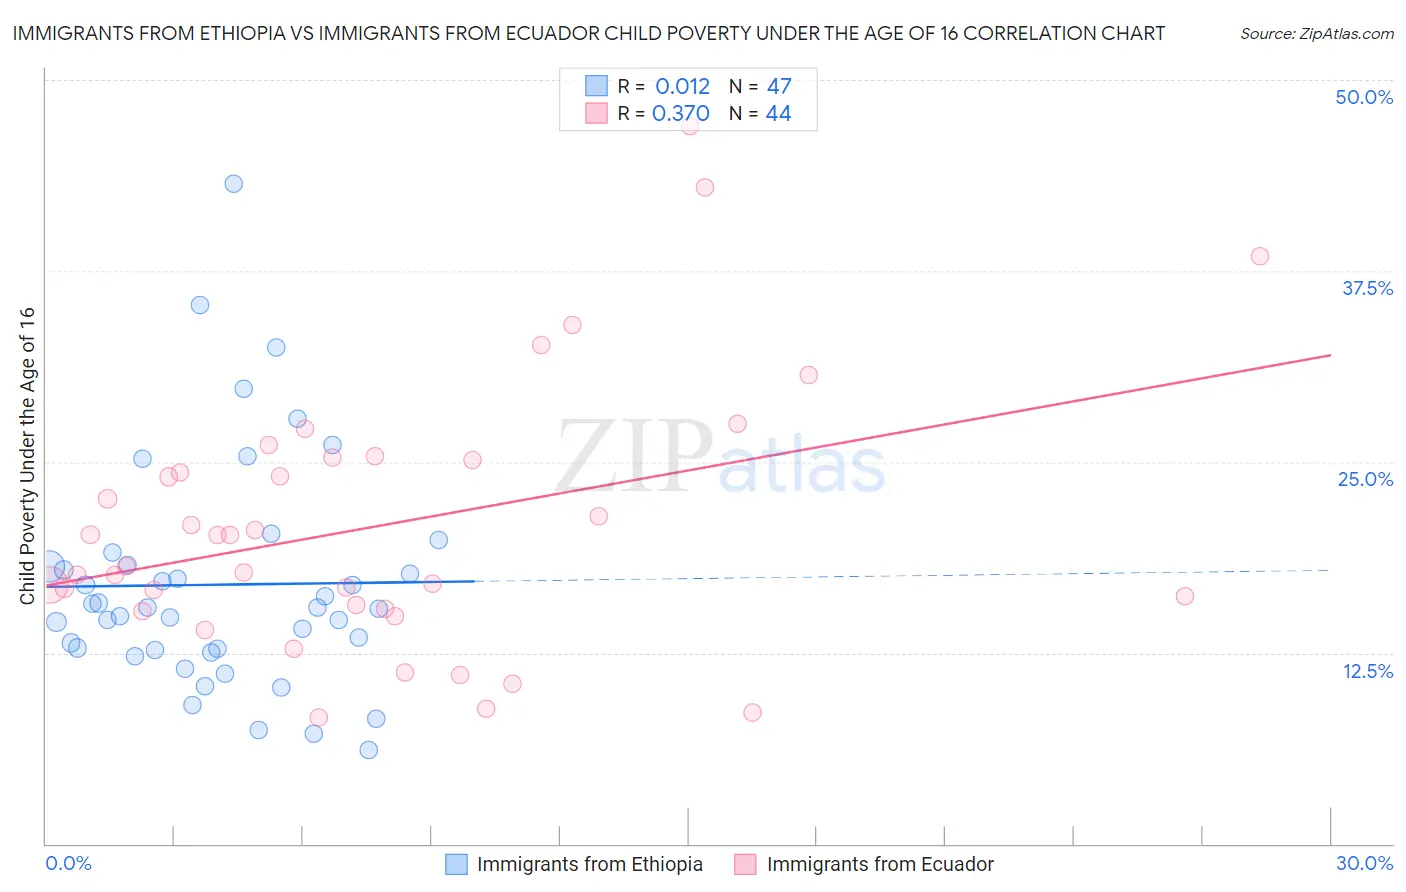 Immigrants from Ethiopia vs Immigrants from Ecuador Child Poverty Under the Age of 16